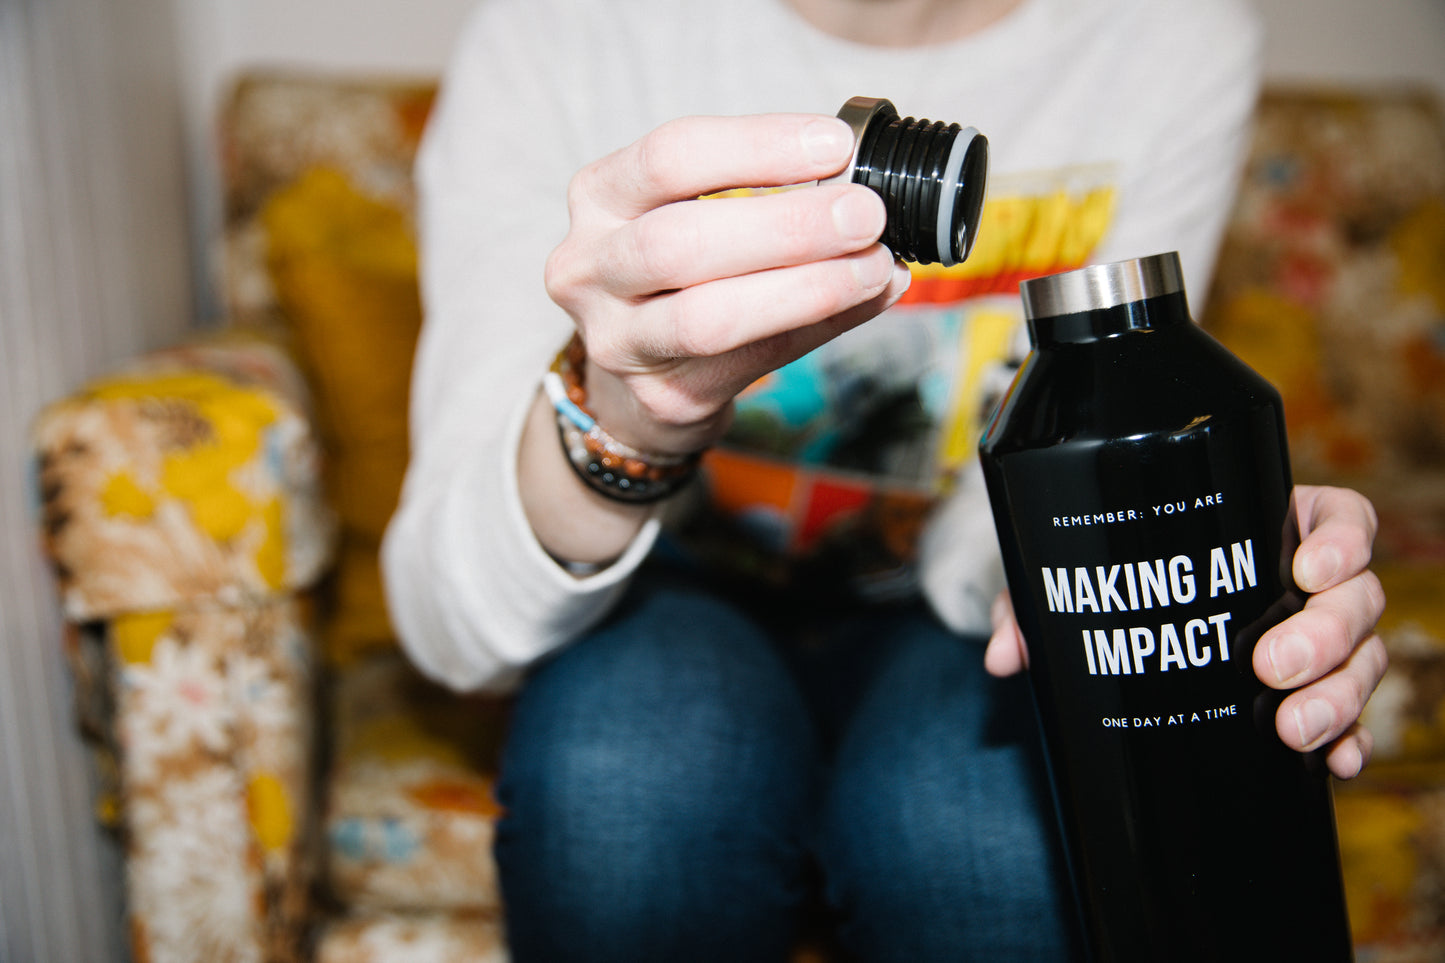 Person sitting on a couch holding a black stainless steel water bottle in one hand and the screw off lid in the other. The water bottle says "Remember, you are making an impact, one day at a time."